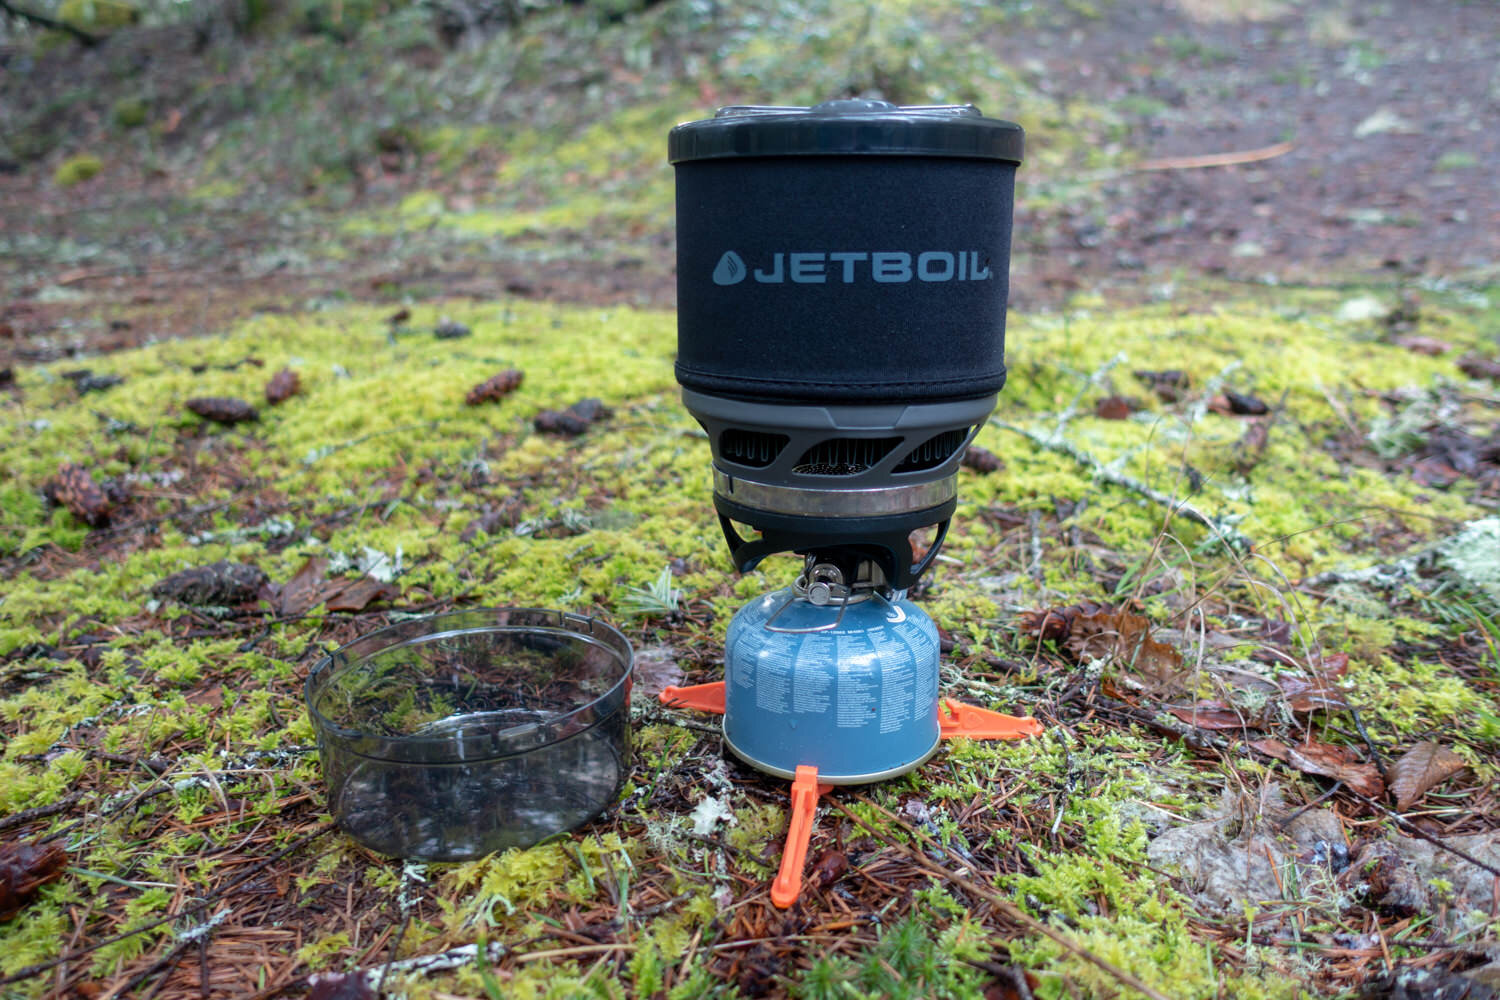 The JetBoil MiniMo has a wider pot than the JetBoil Flash, and it allows you to control the power of the flame.